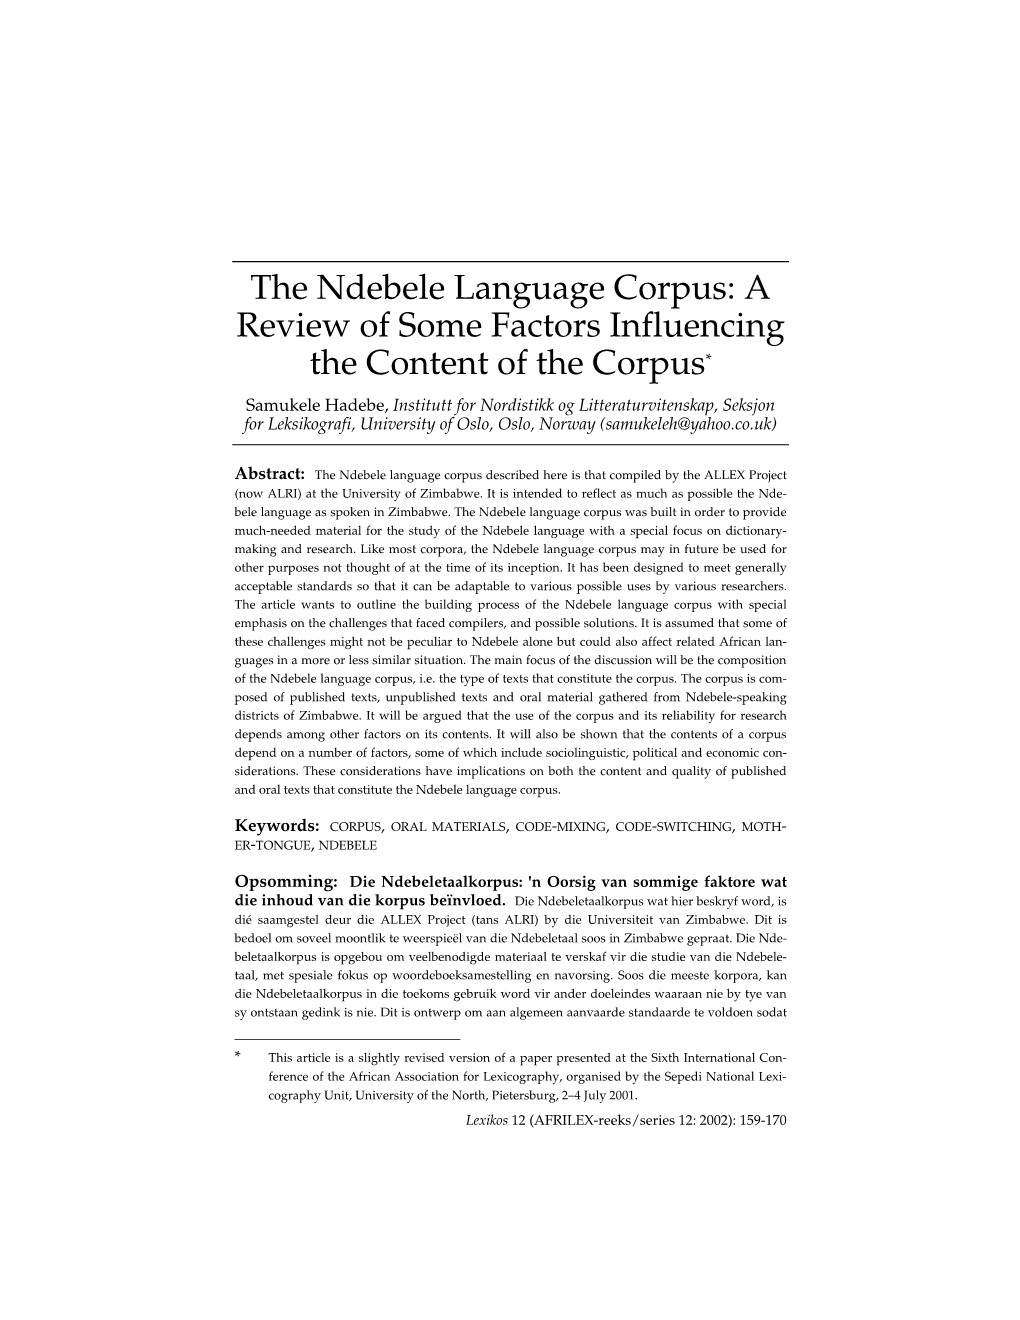 The Ndebele Language Corpus: a Review of Some Factors Influencing